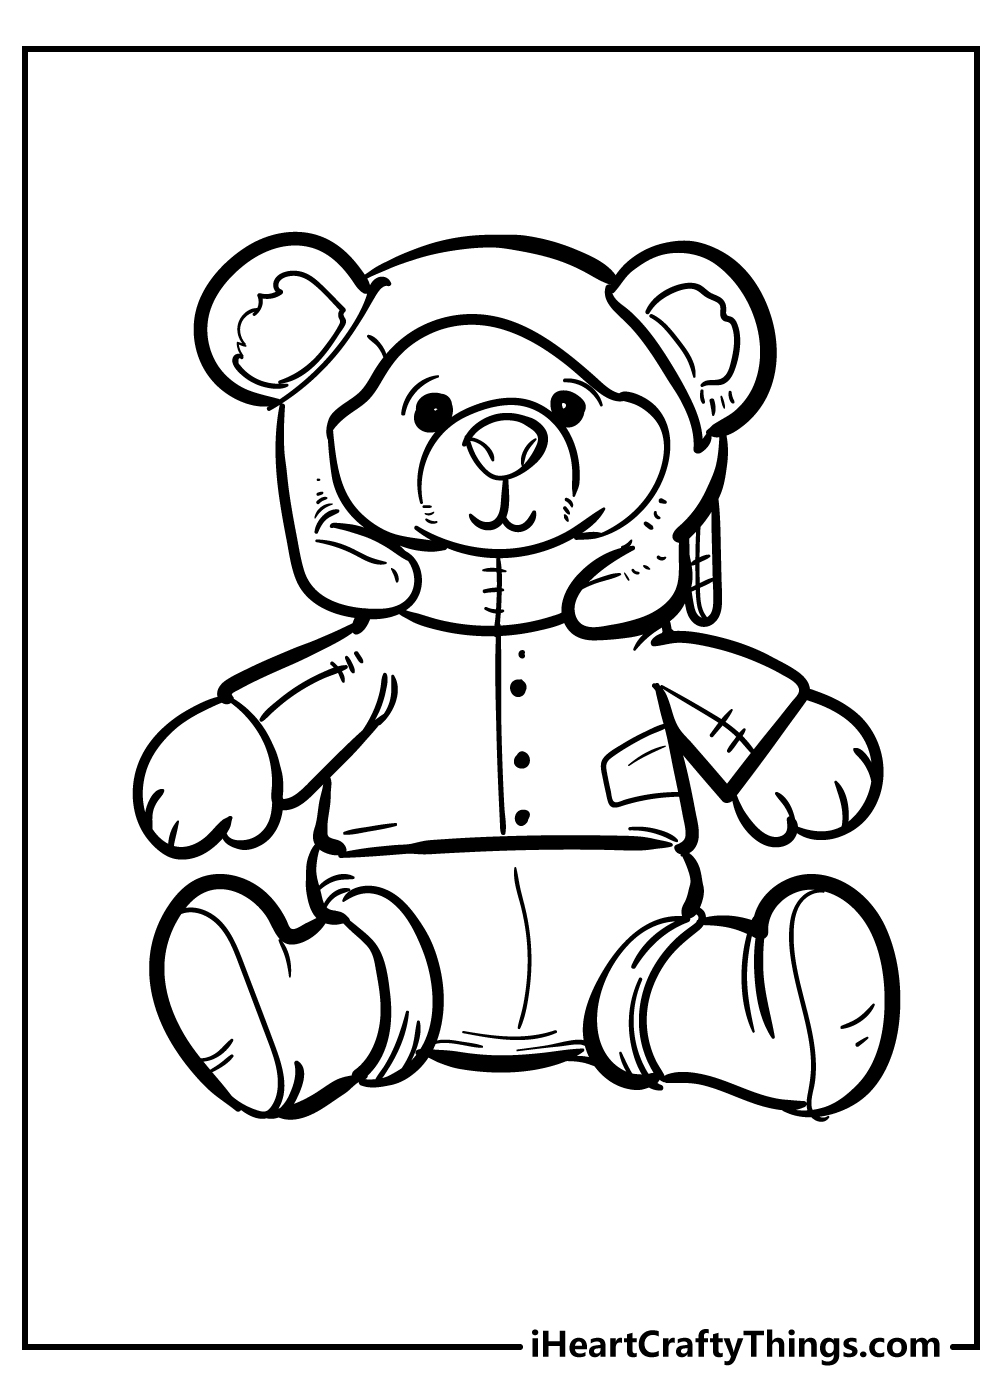 Teddy bear coloring pages free printables